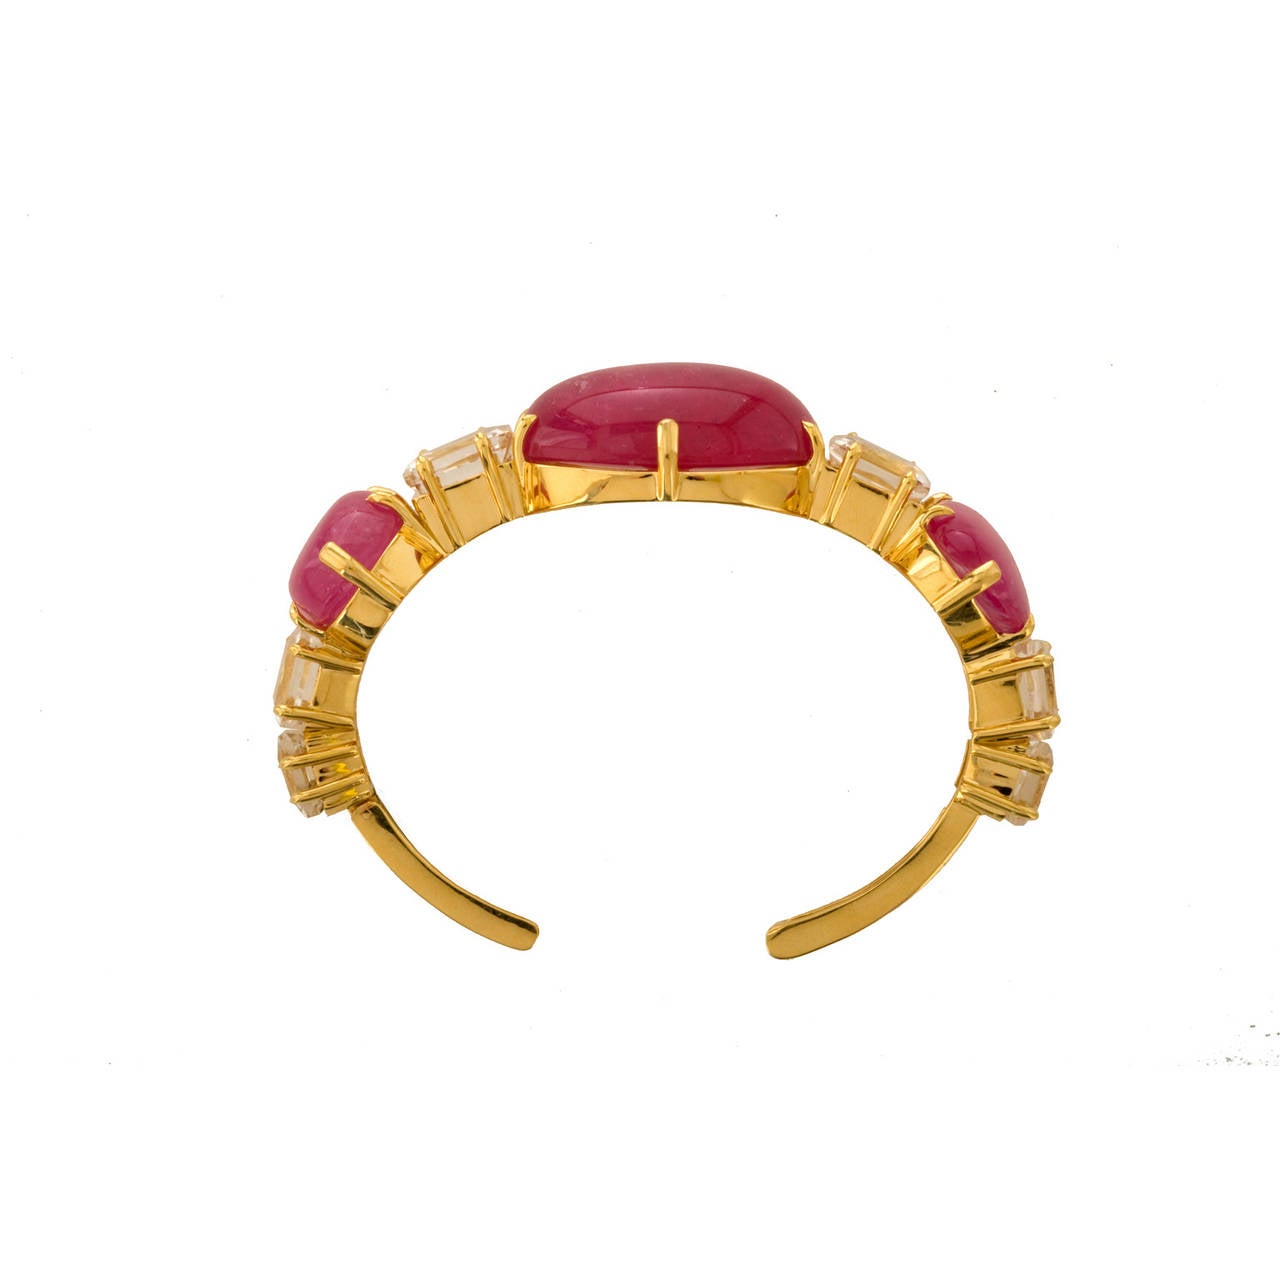 The wonderful brilliant pink of these large tourmalines is the showpiece of this bracelet. They are natural stones from that place on earth that has yielded so many of the finest  sapphires and rubies, Burma.  Here set in heavy 18K gold, the metal